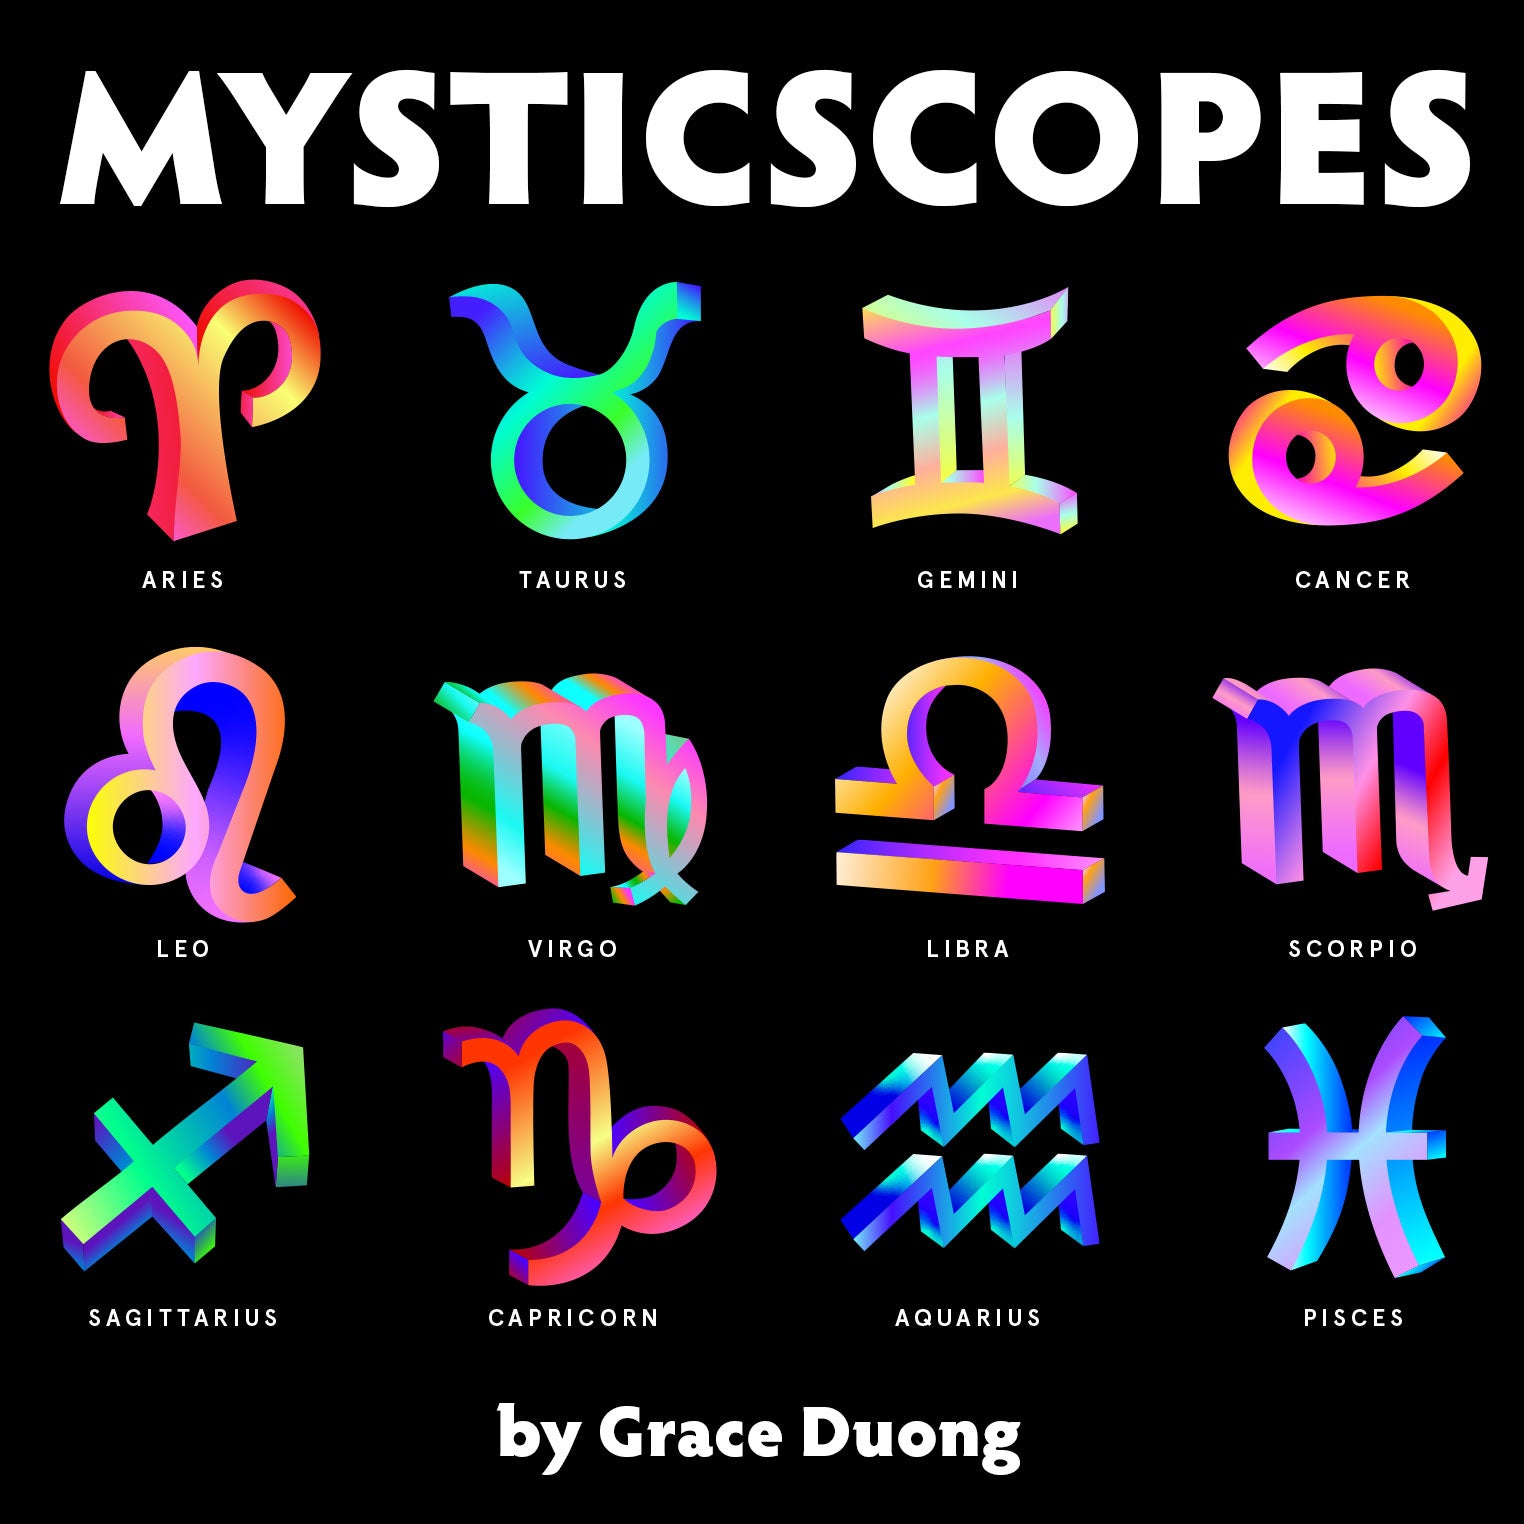 Mysticscopes - a weekly show with Tarot and Oracle card pulls by Grace Duong